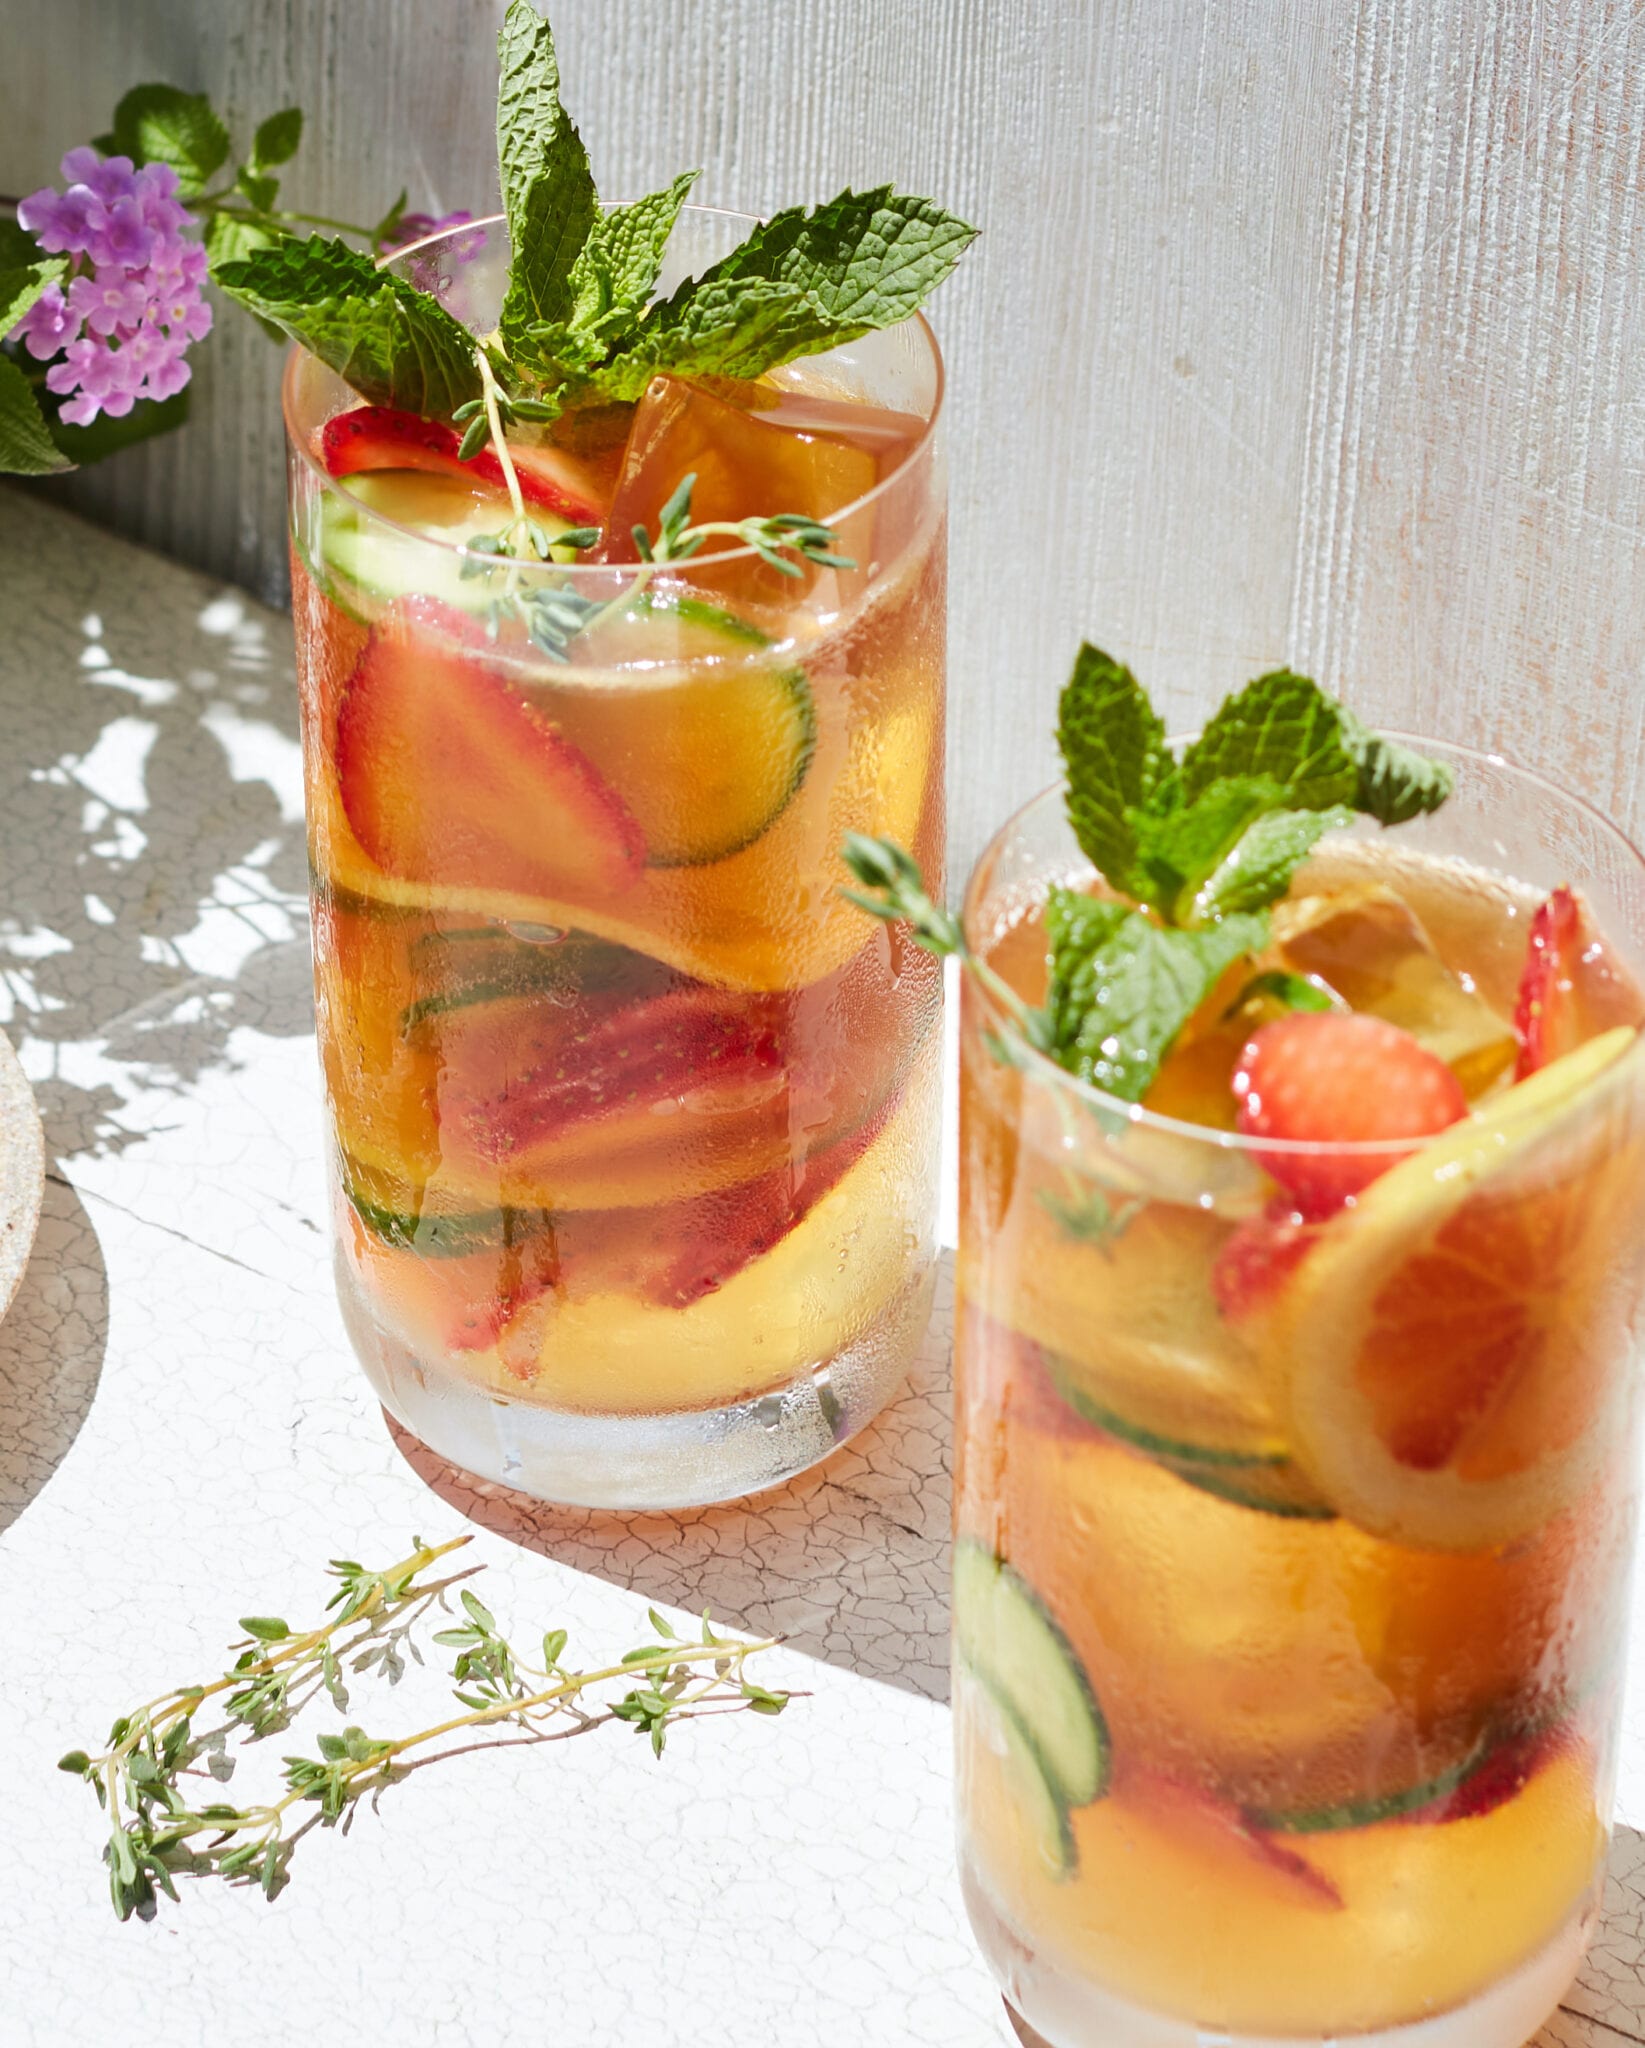 Classic Pimm's Cup